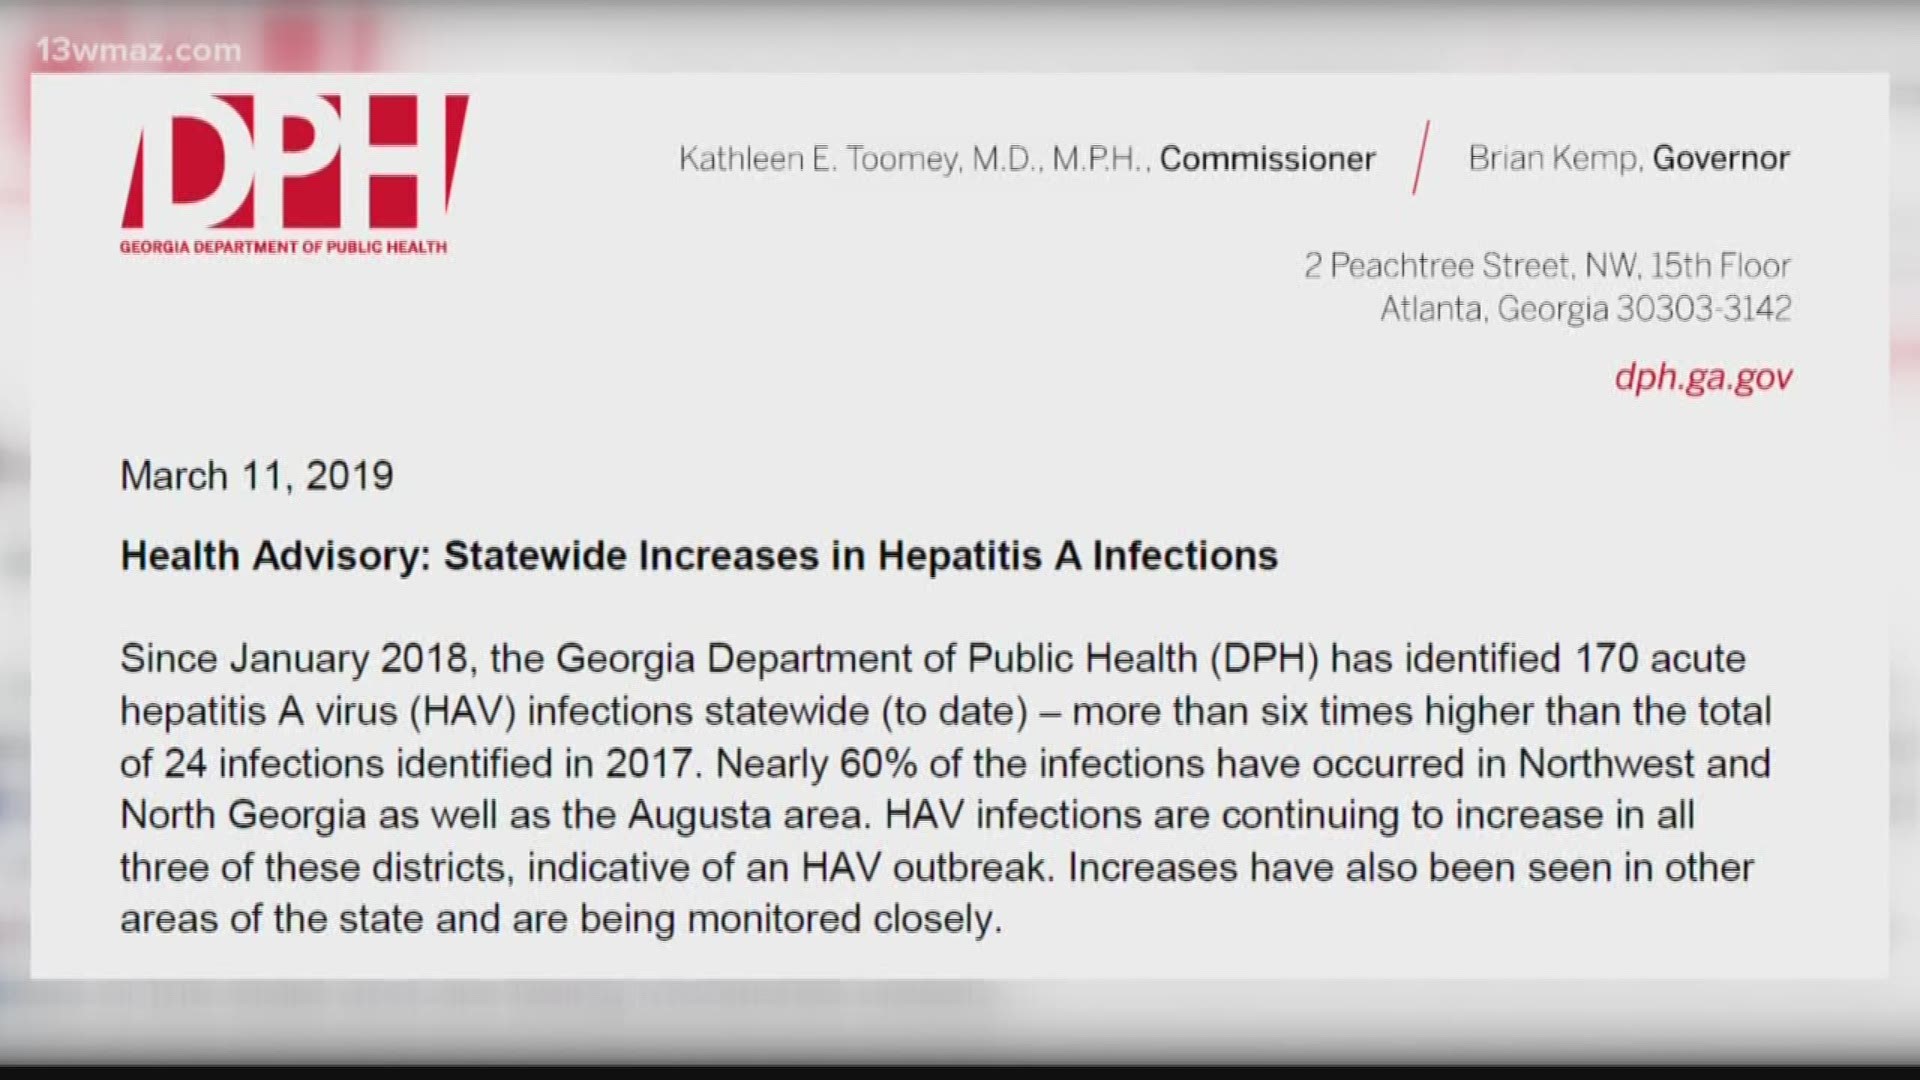 One of the most common ways to get Hepatitis A is through contaminated food, according to the Georgia Department of Public Health. They issued an advisory last month that there's been a statewide increase in infections of the virus.